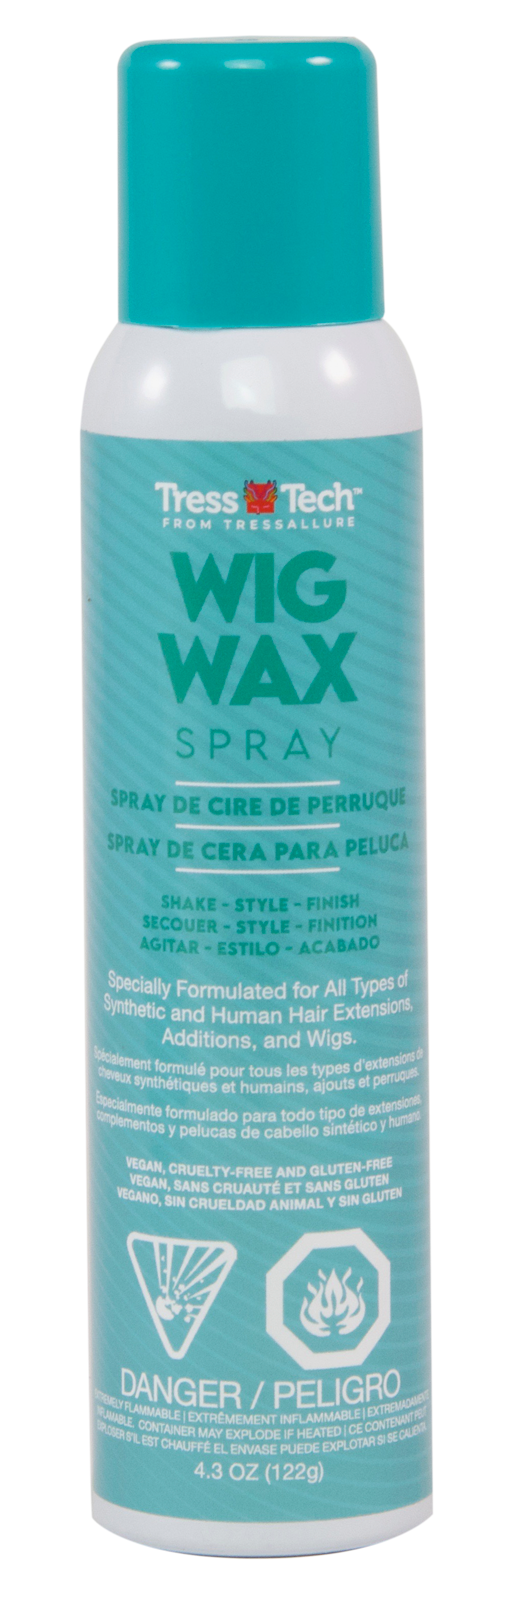 Wig Wax (travel size) by Tress Allure